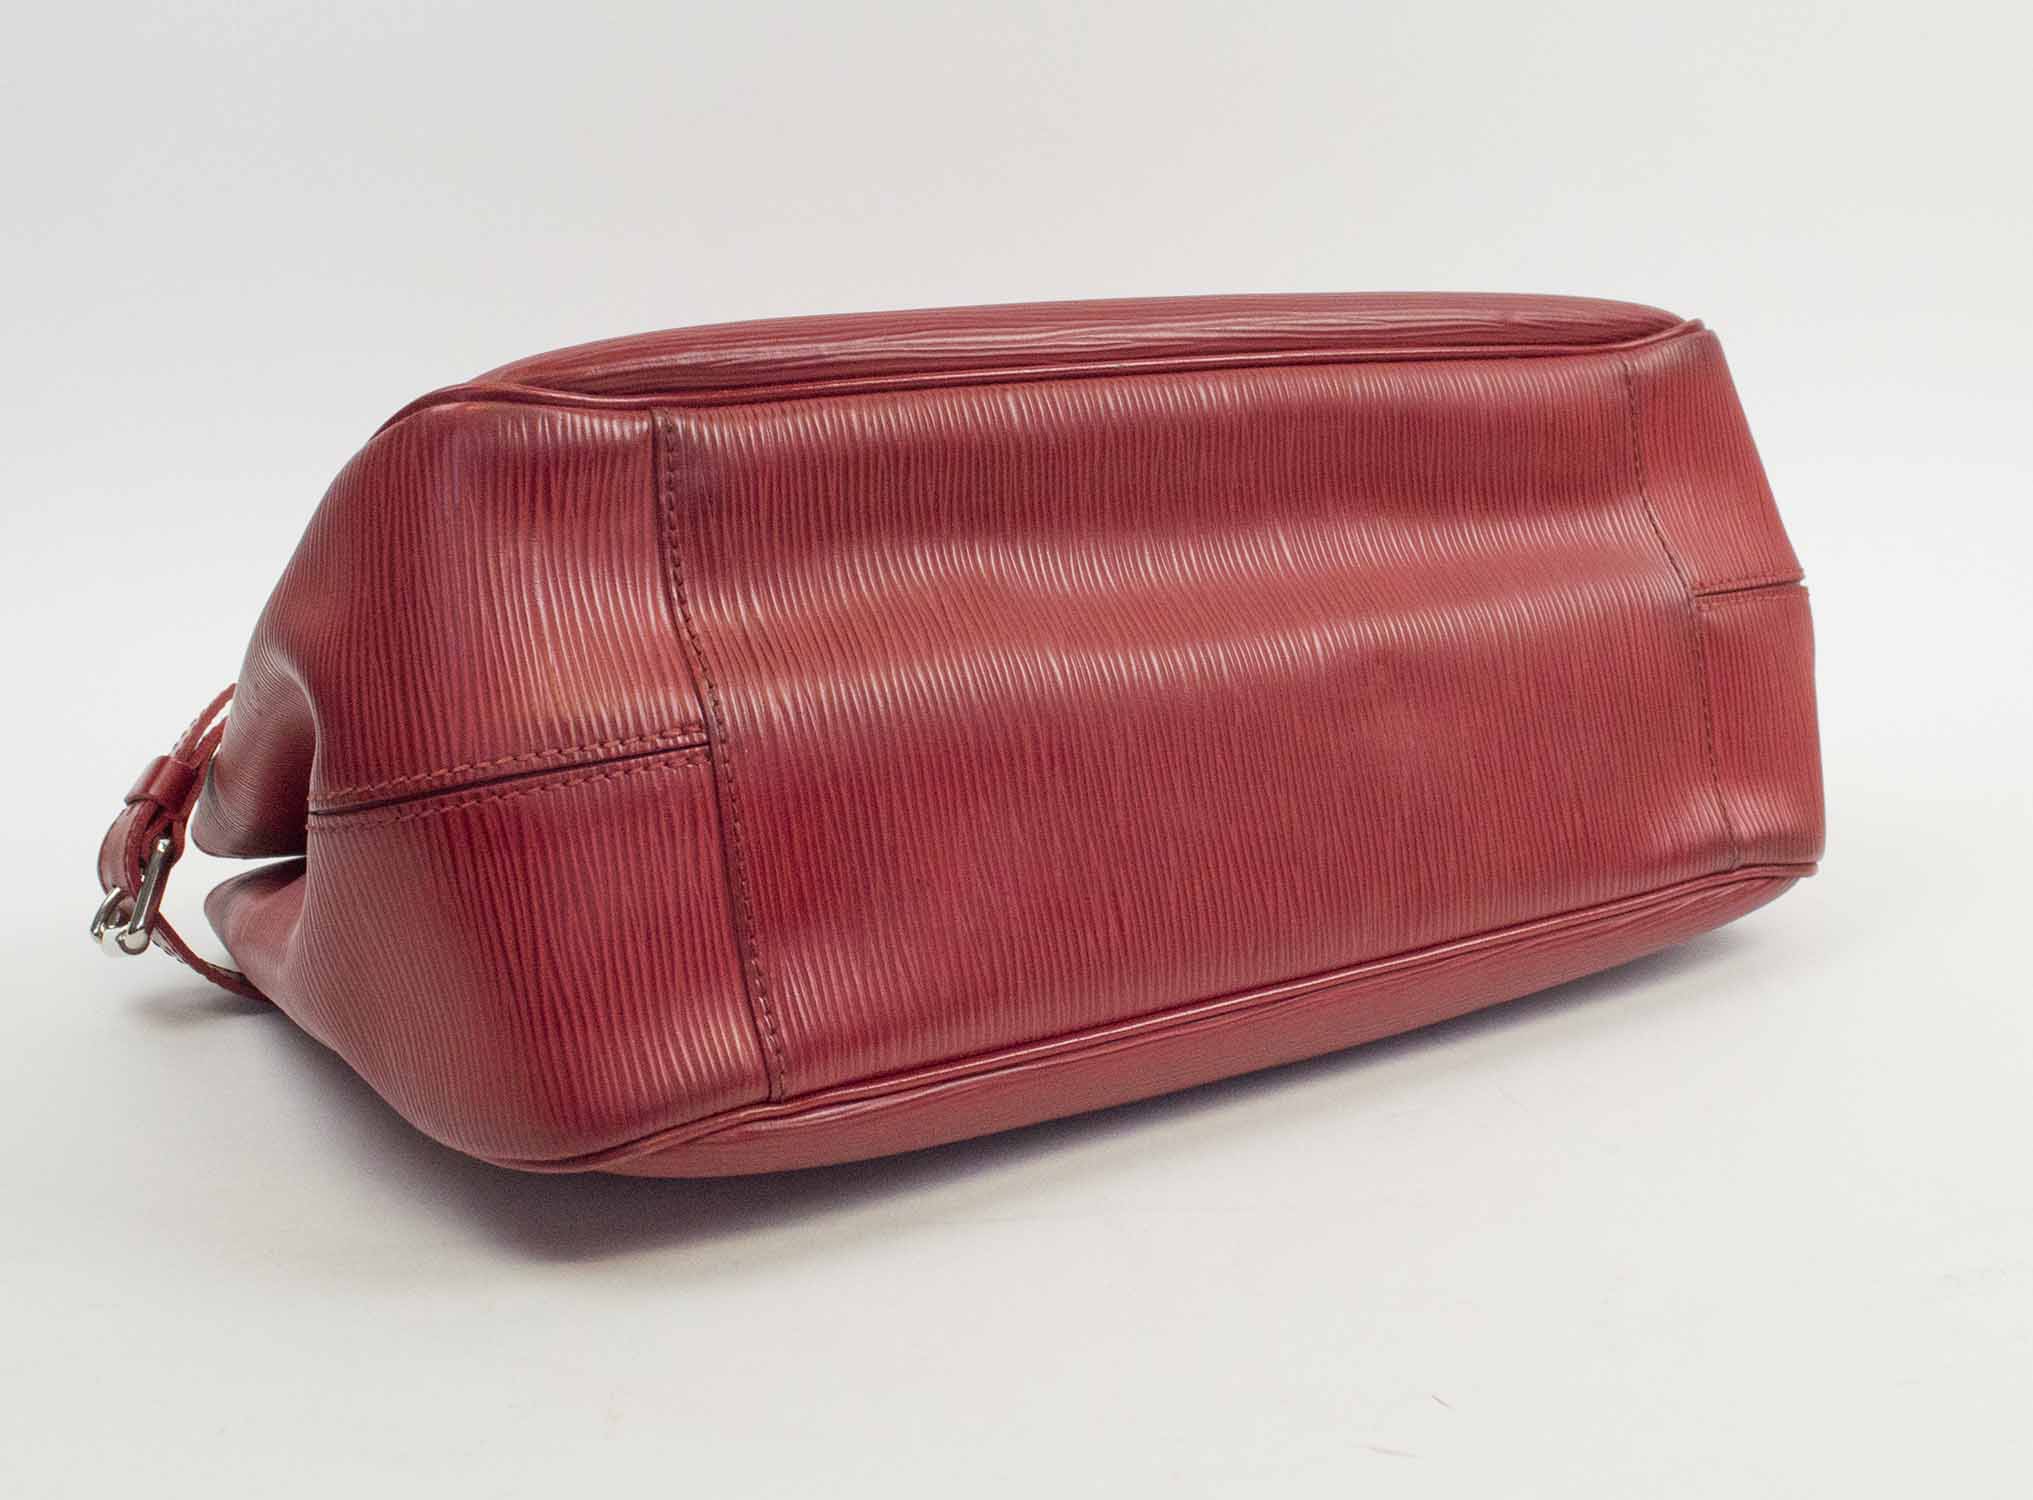 LOUIS VUITTON PASSY EPI RED LEATHER BAG, with smooth leather trim